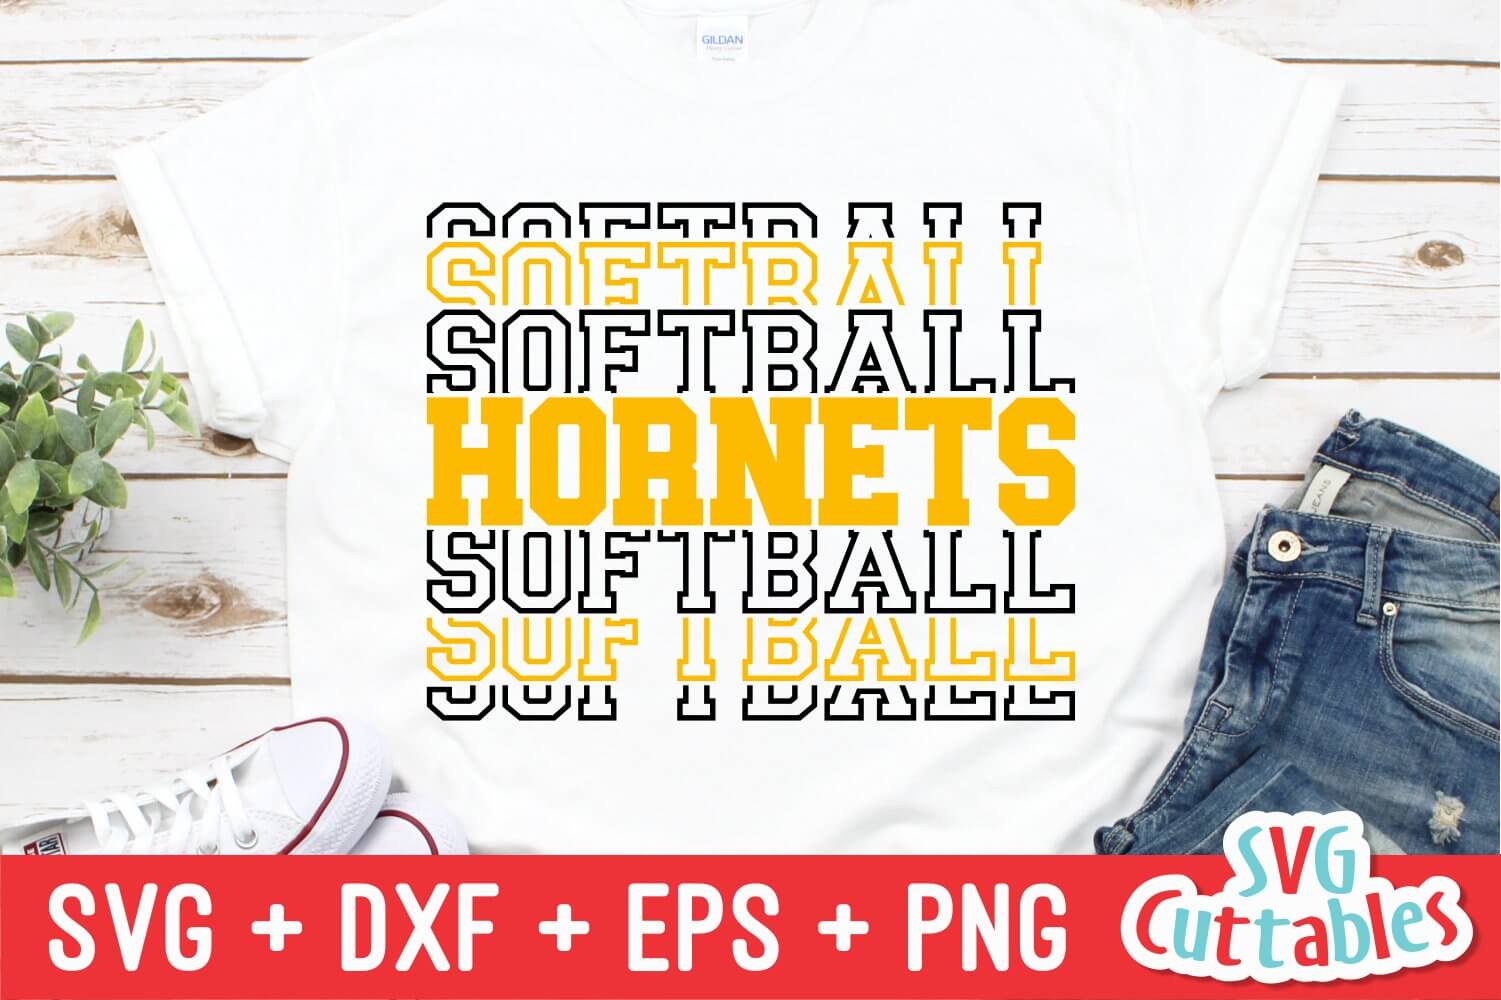 Softball hornets with yellow letterings.